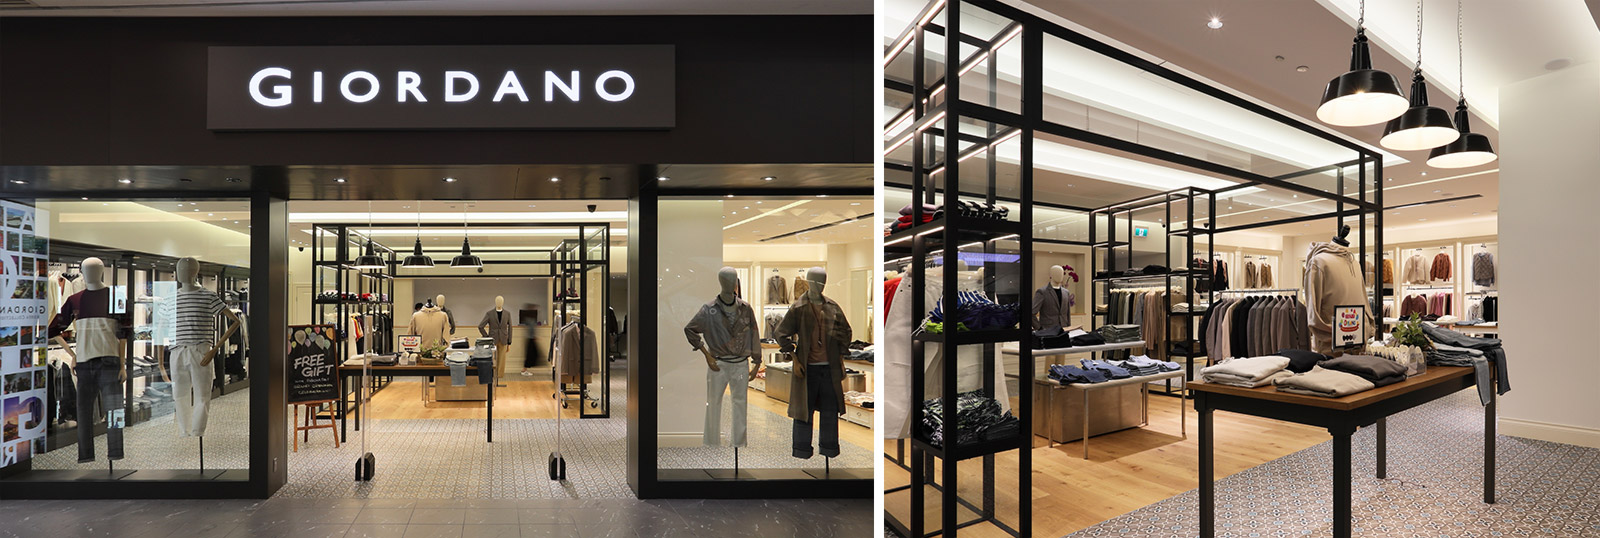 Giordano, a popular casual-wear chain operating over 2,400 stores in more than 30 countries, also successfully opened its first North American flagship store with Fairchild Retail. The store features Giordano's unique Korea-only capsule collection.